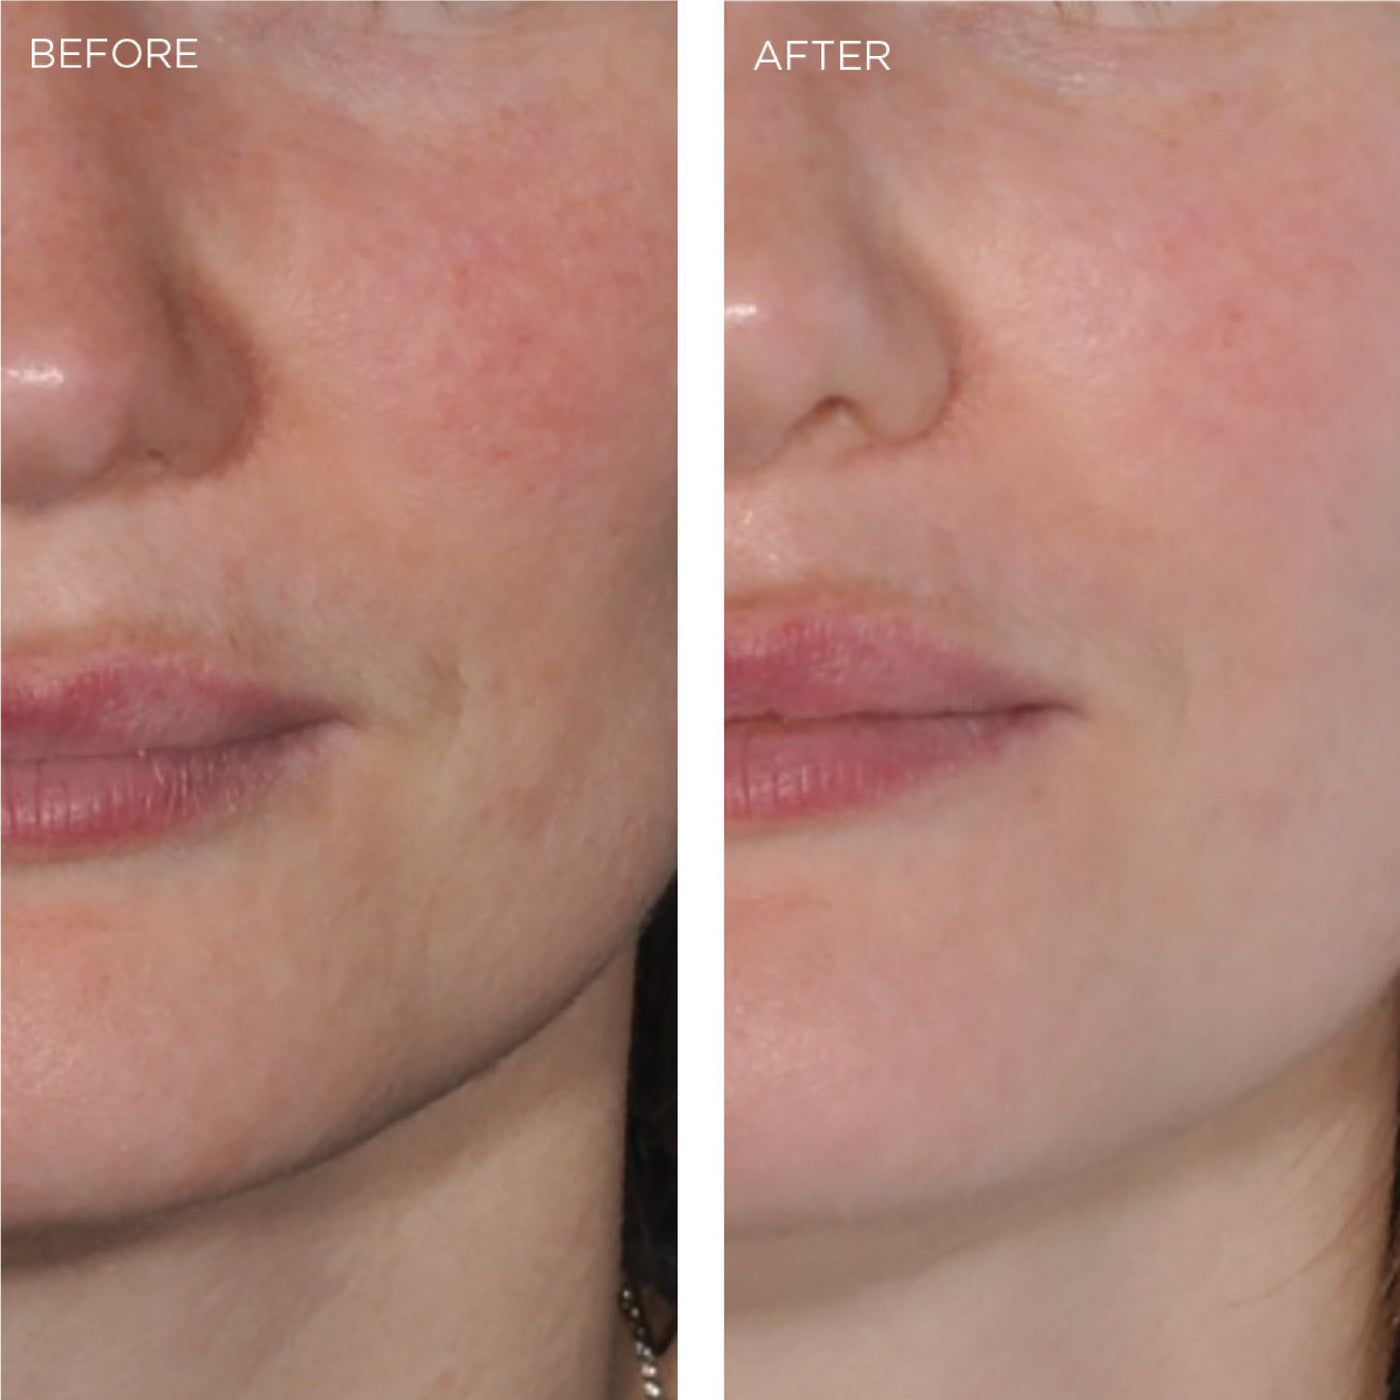 Before and After a Single Use of Our Brightening Peel